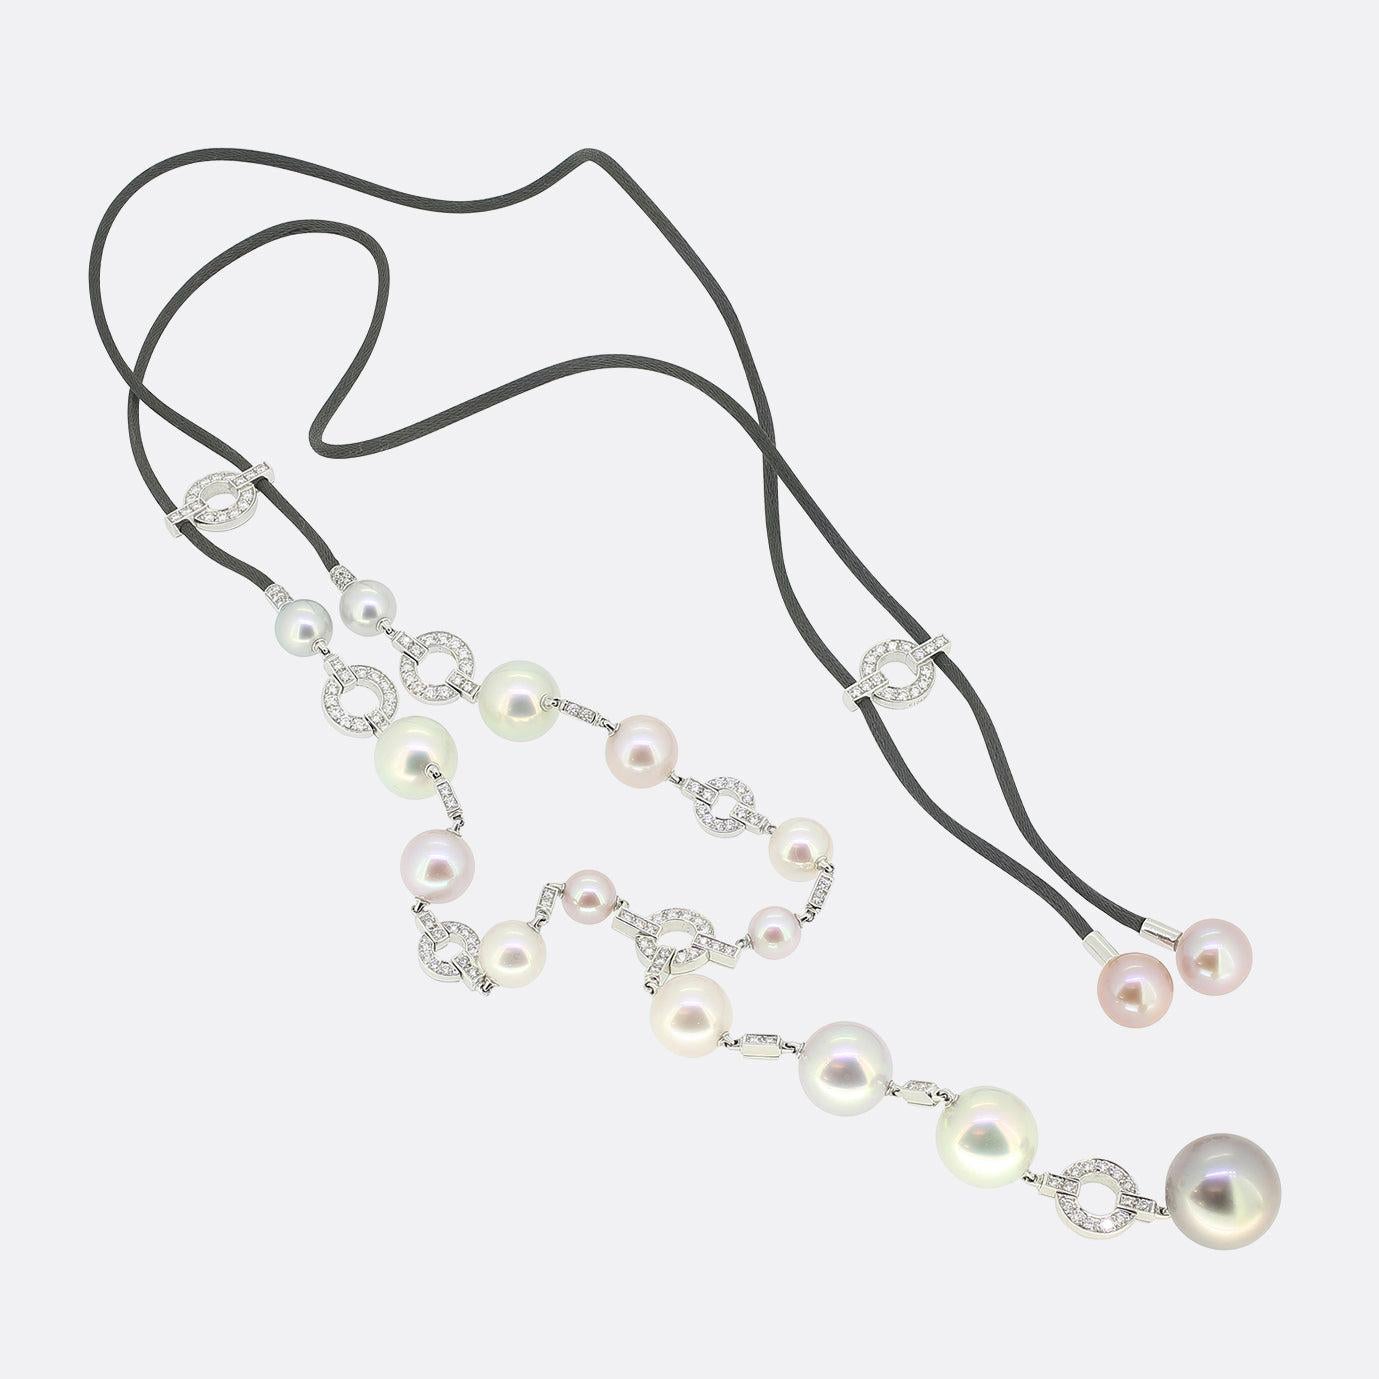 Here we have a truly wonderful necklace from the luxury jewellery designer Cartier. The necklace features sixteen beautiful south sea pearls that vary in size and colour. The largest pearl is a dark tone, sits at the bottom and is 16.5mm in